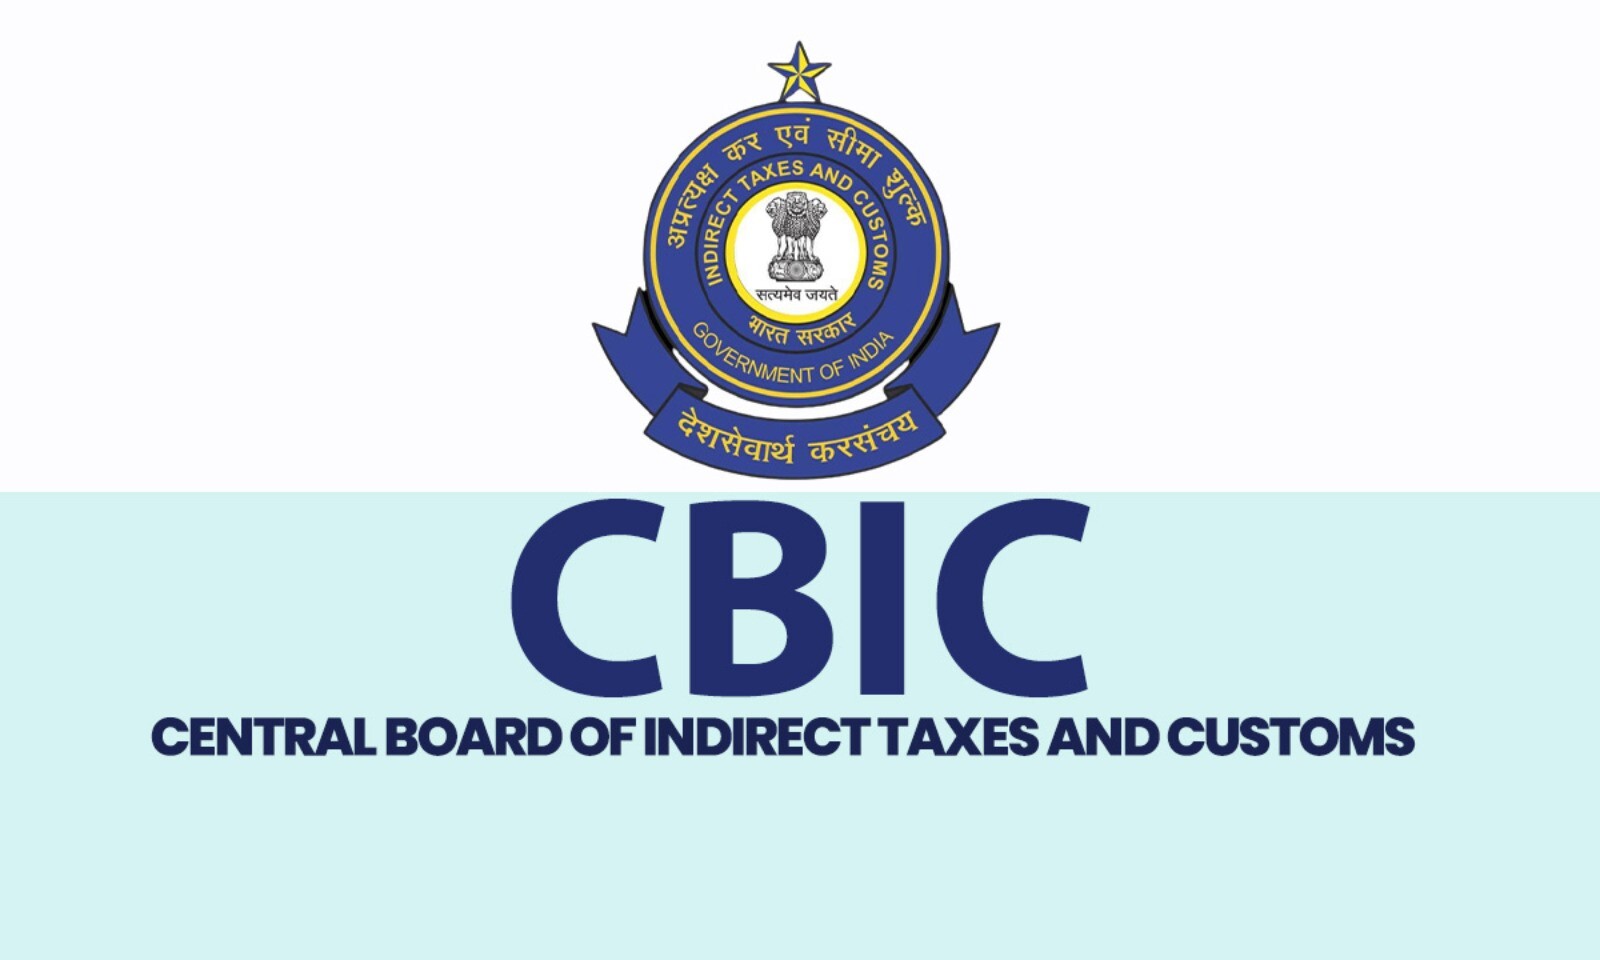 CBIC takes action: Anti-dumping duty levied on imported aluminium wheels from China